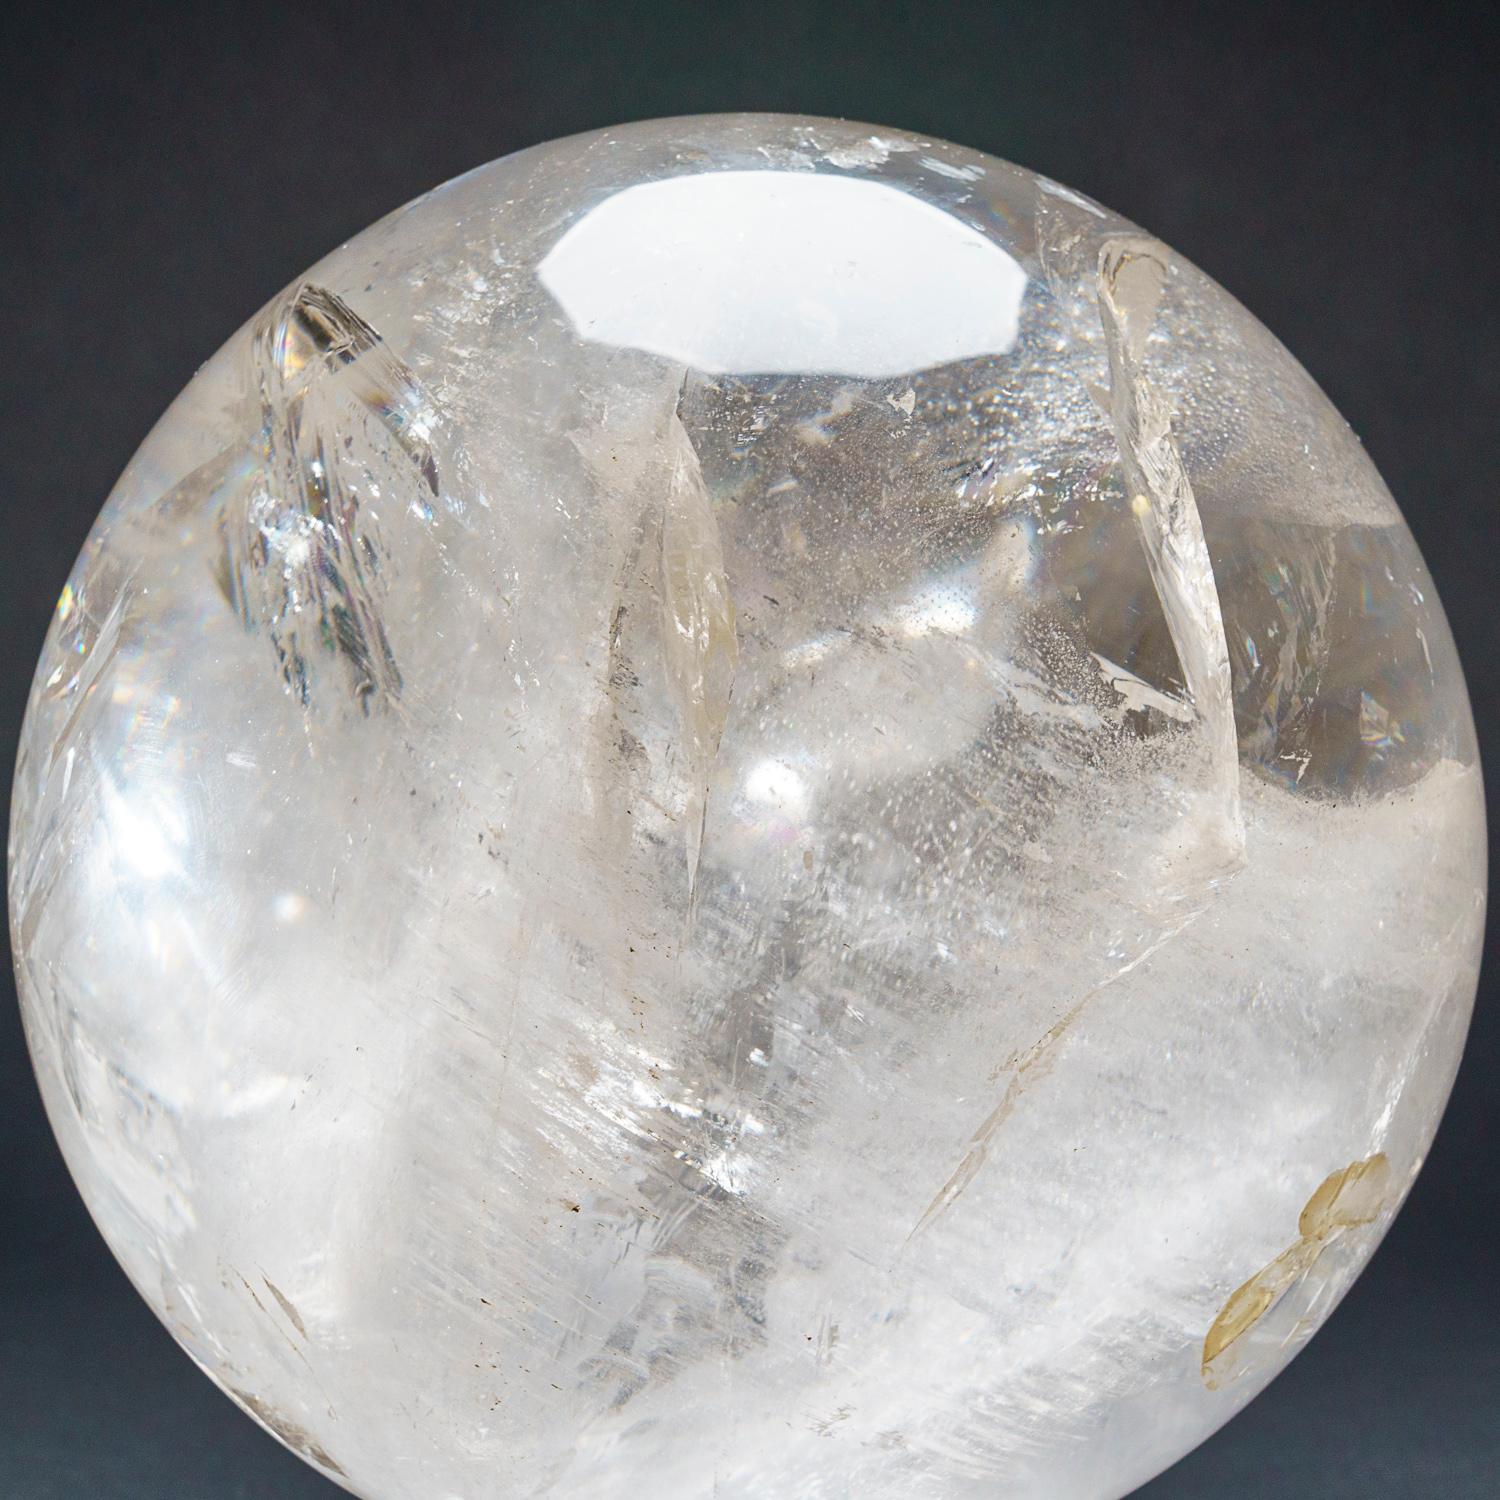 This museum quality large polished Clear Quartz sphere from Brazil. This sphere boasts a weight of 34lbs and has been expertly polished to a high level of transparency and reflectivity, making it an excellent specimen for metaphysical use. It is a